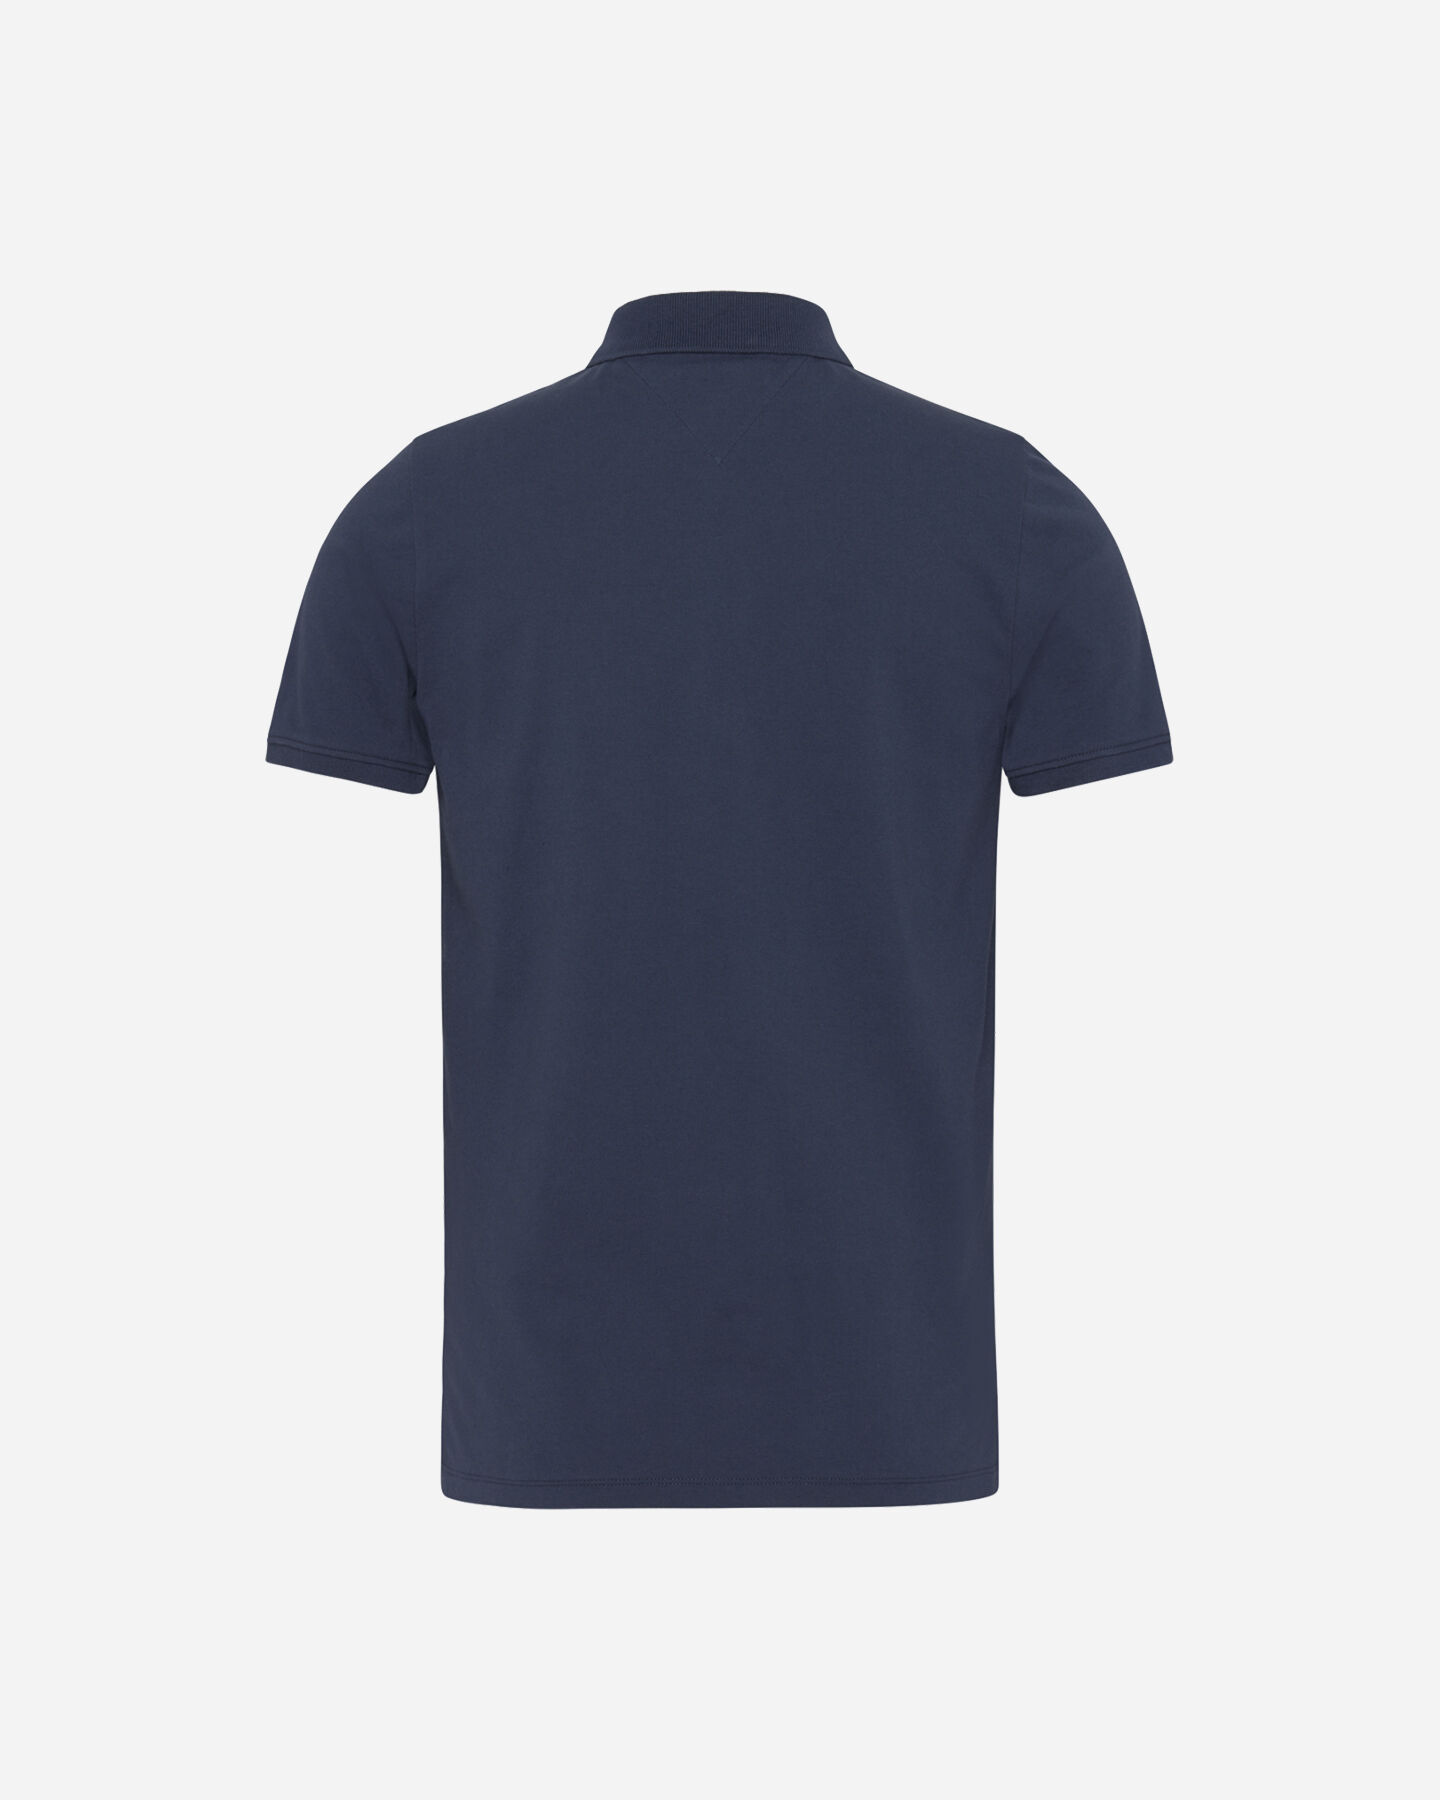  Polo TOMMY HILFIGER CLASSICS SOLID STRETCH M S4112929|C87|S scatto 1